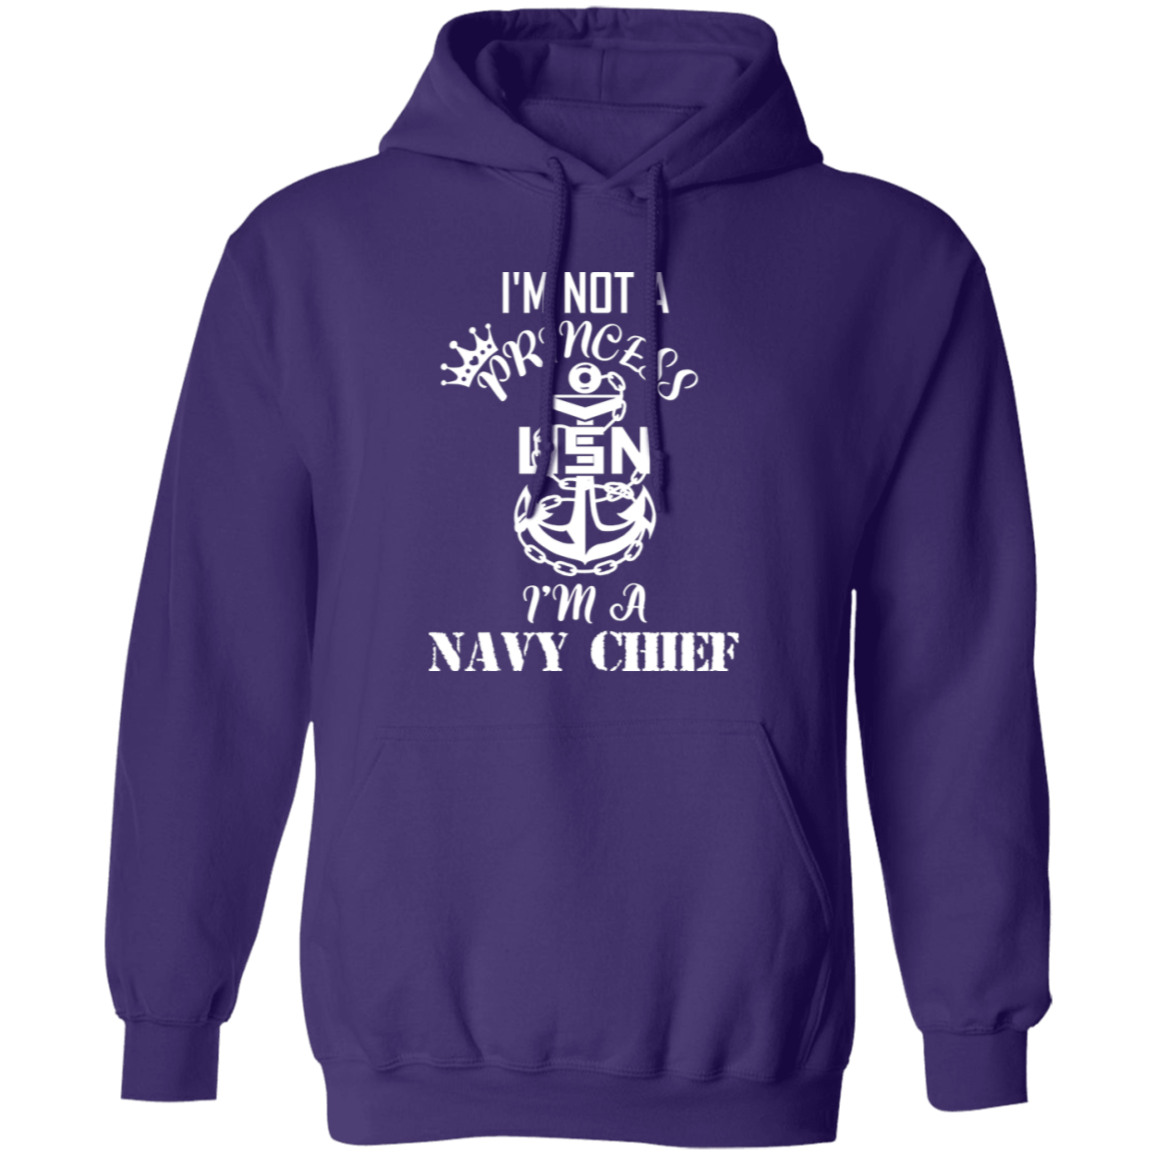 I'm not a Princess White Design Pullover Hoodie